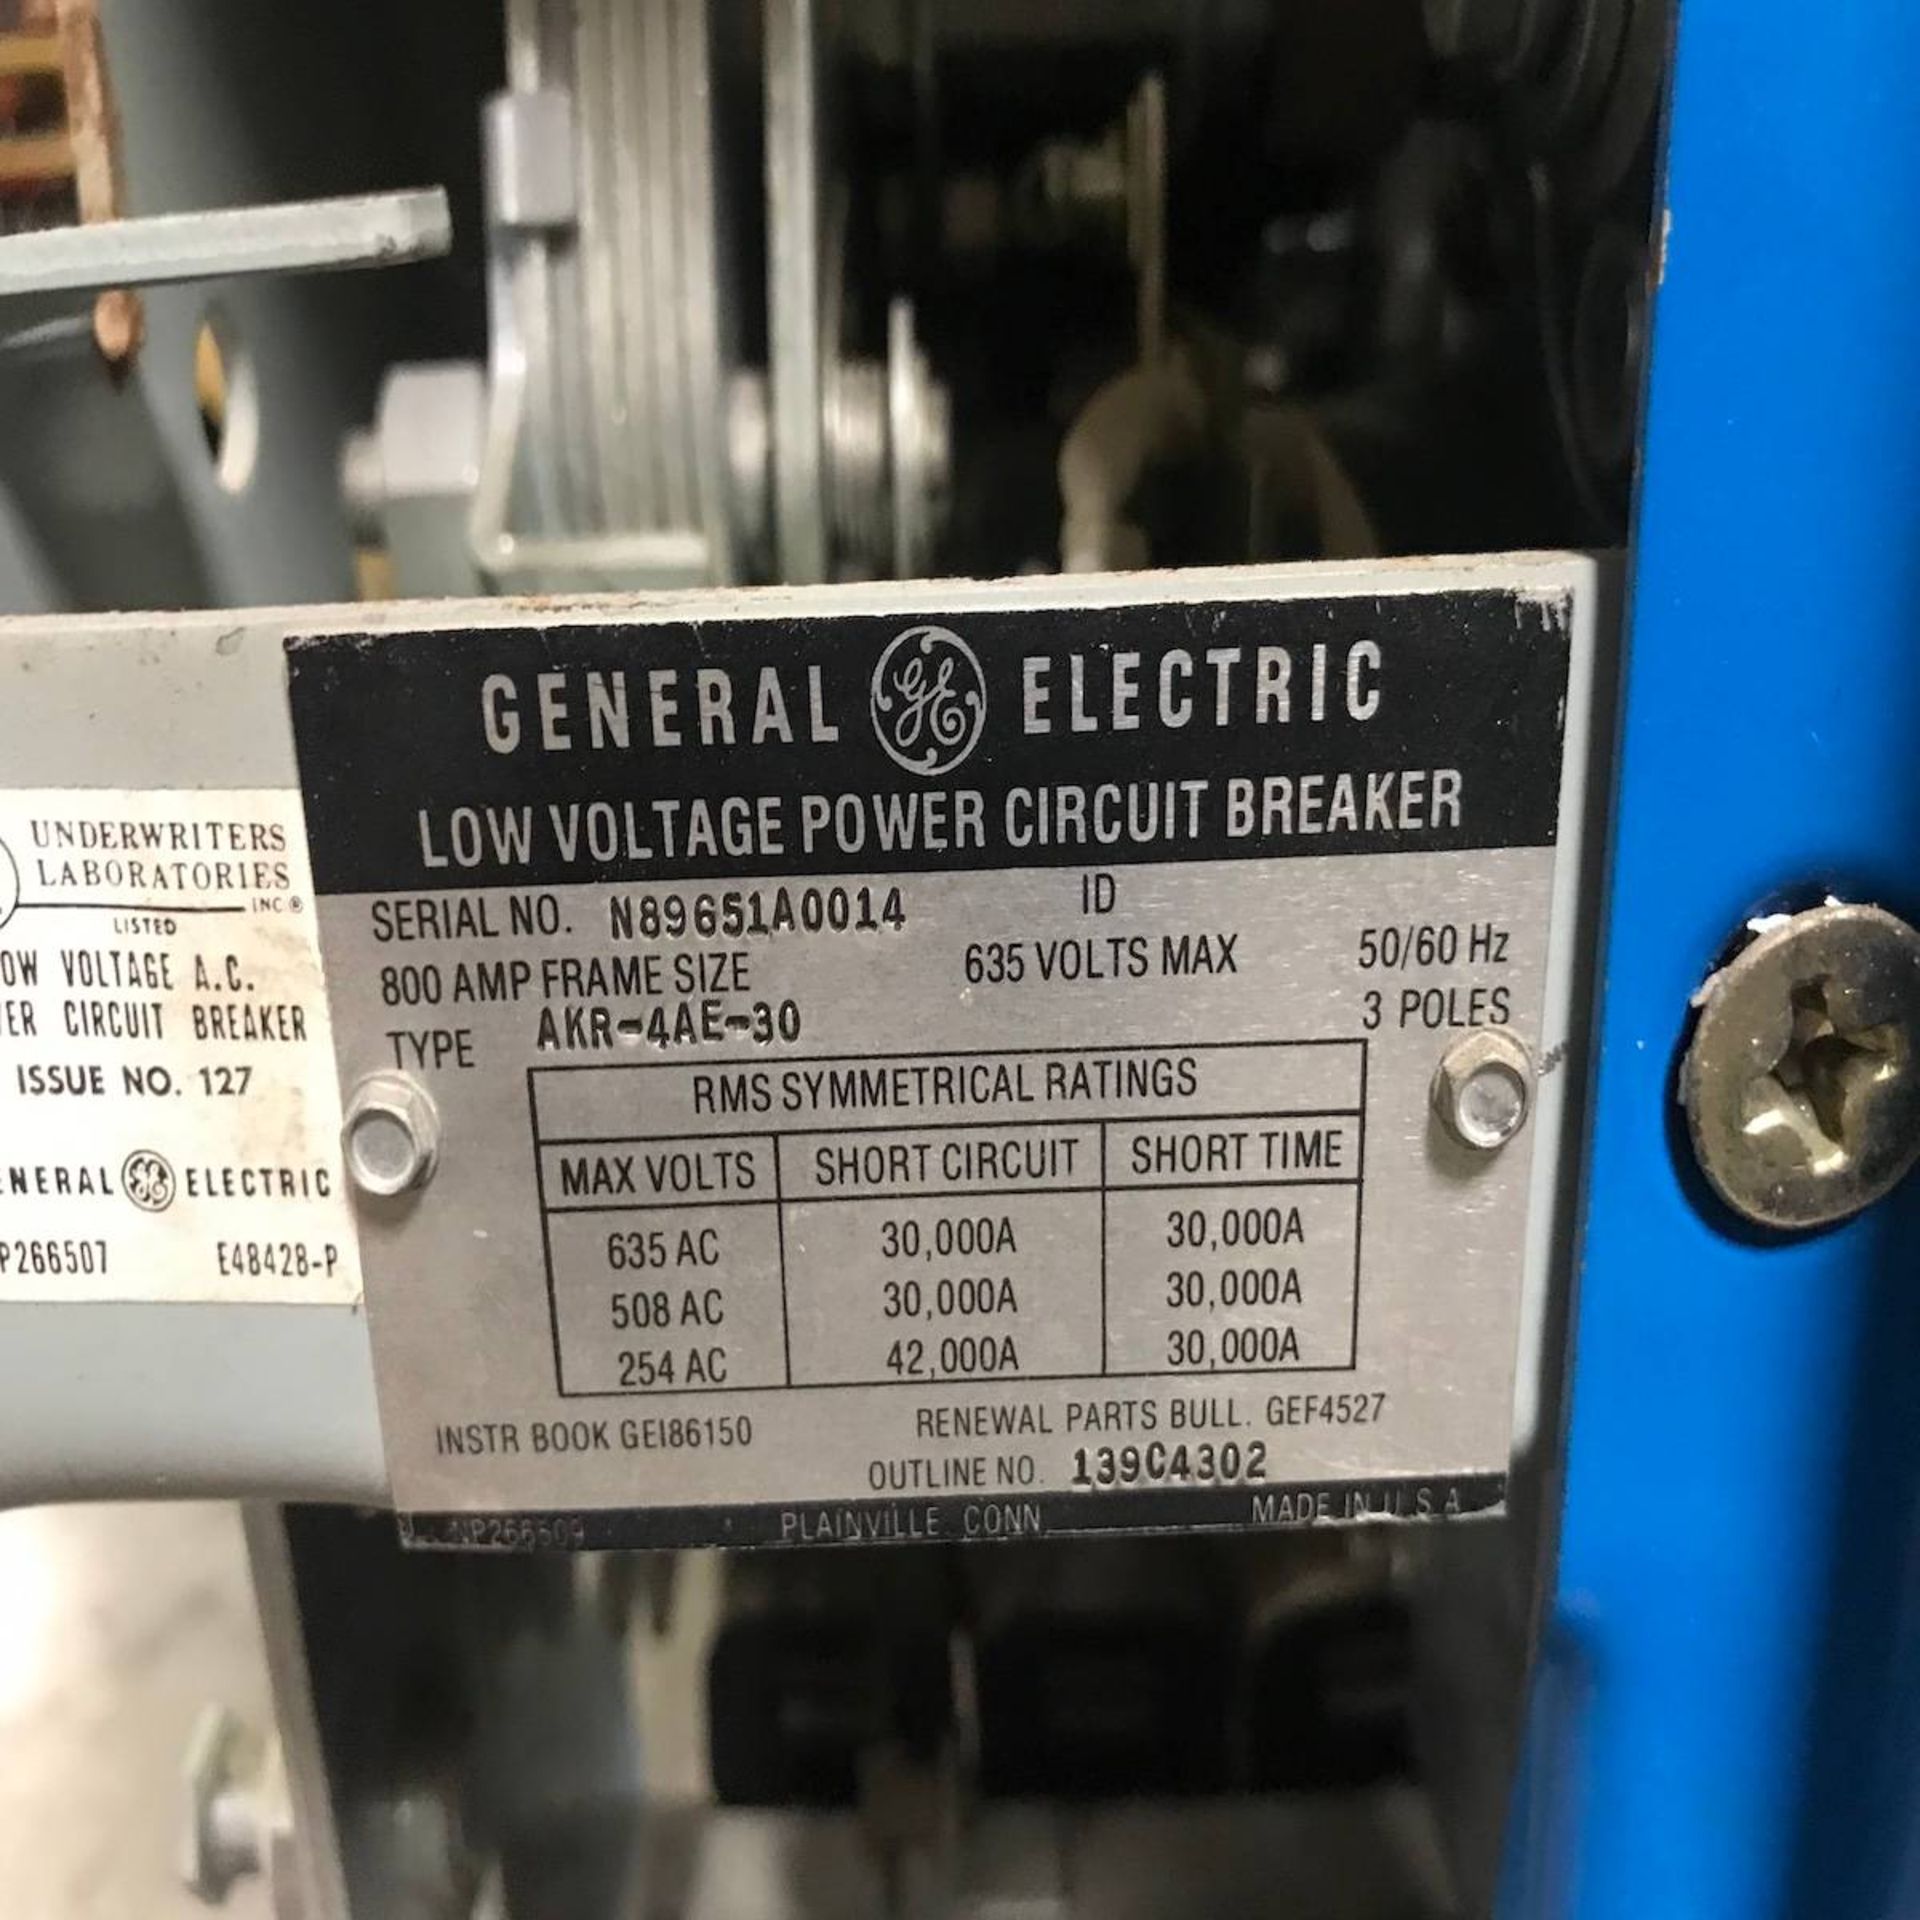 General Electric AKR-4AE-30 Low Voltage Power Circuit Breaker - Image 2 of 4